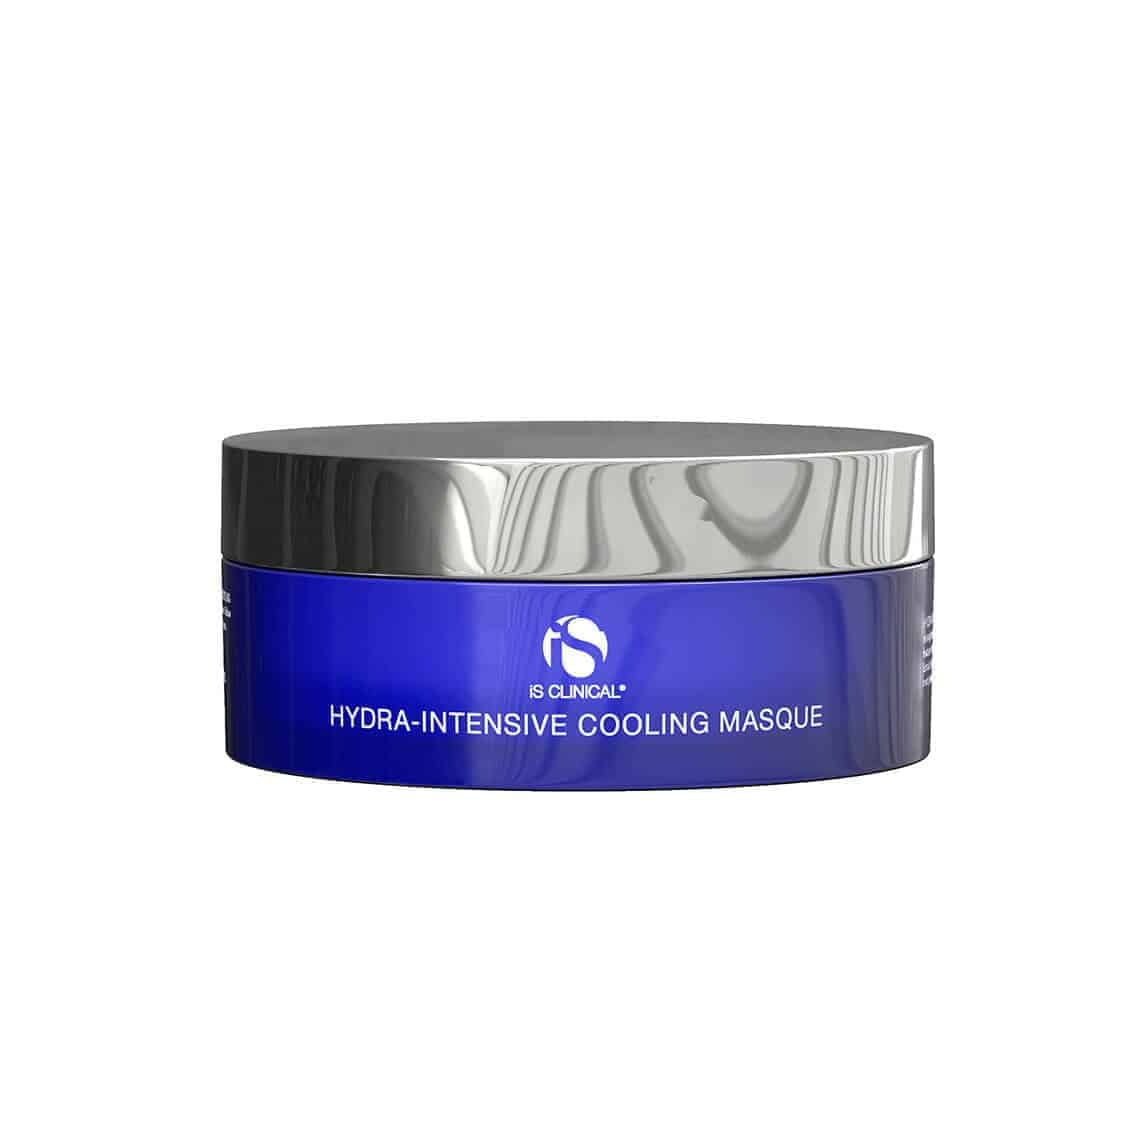 hydra intensive cooling masque is clinical